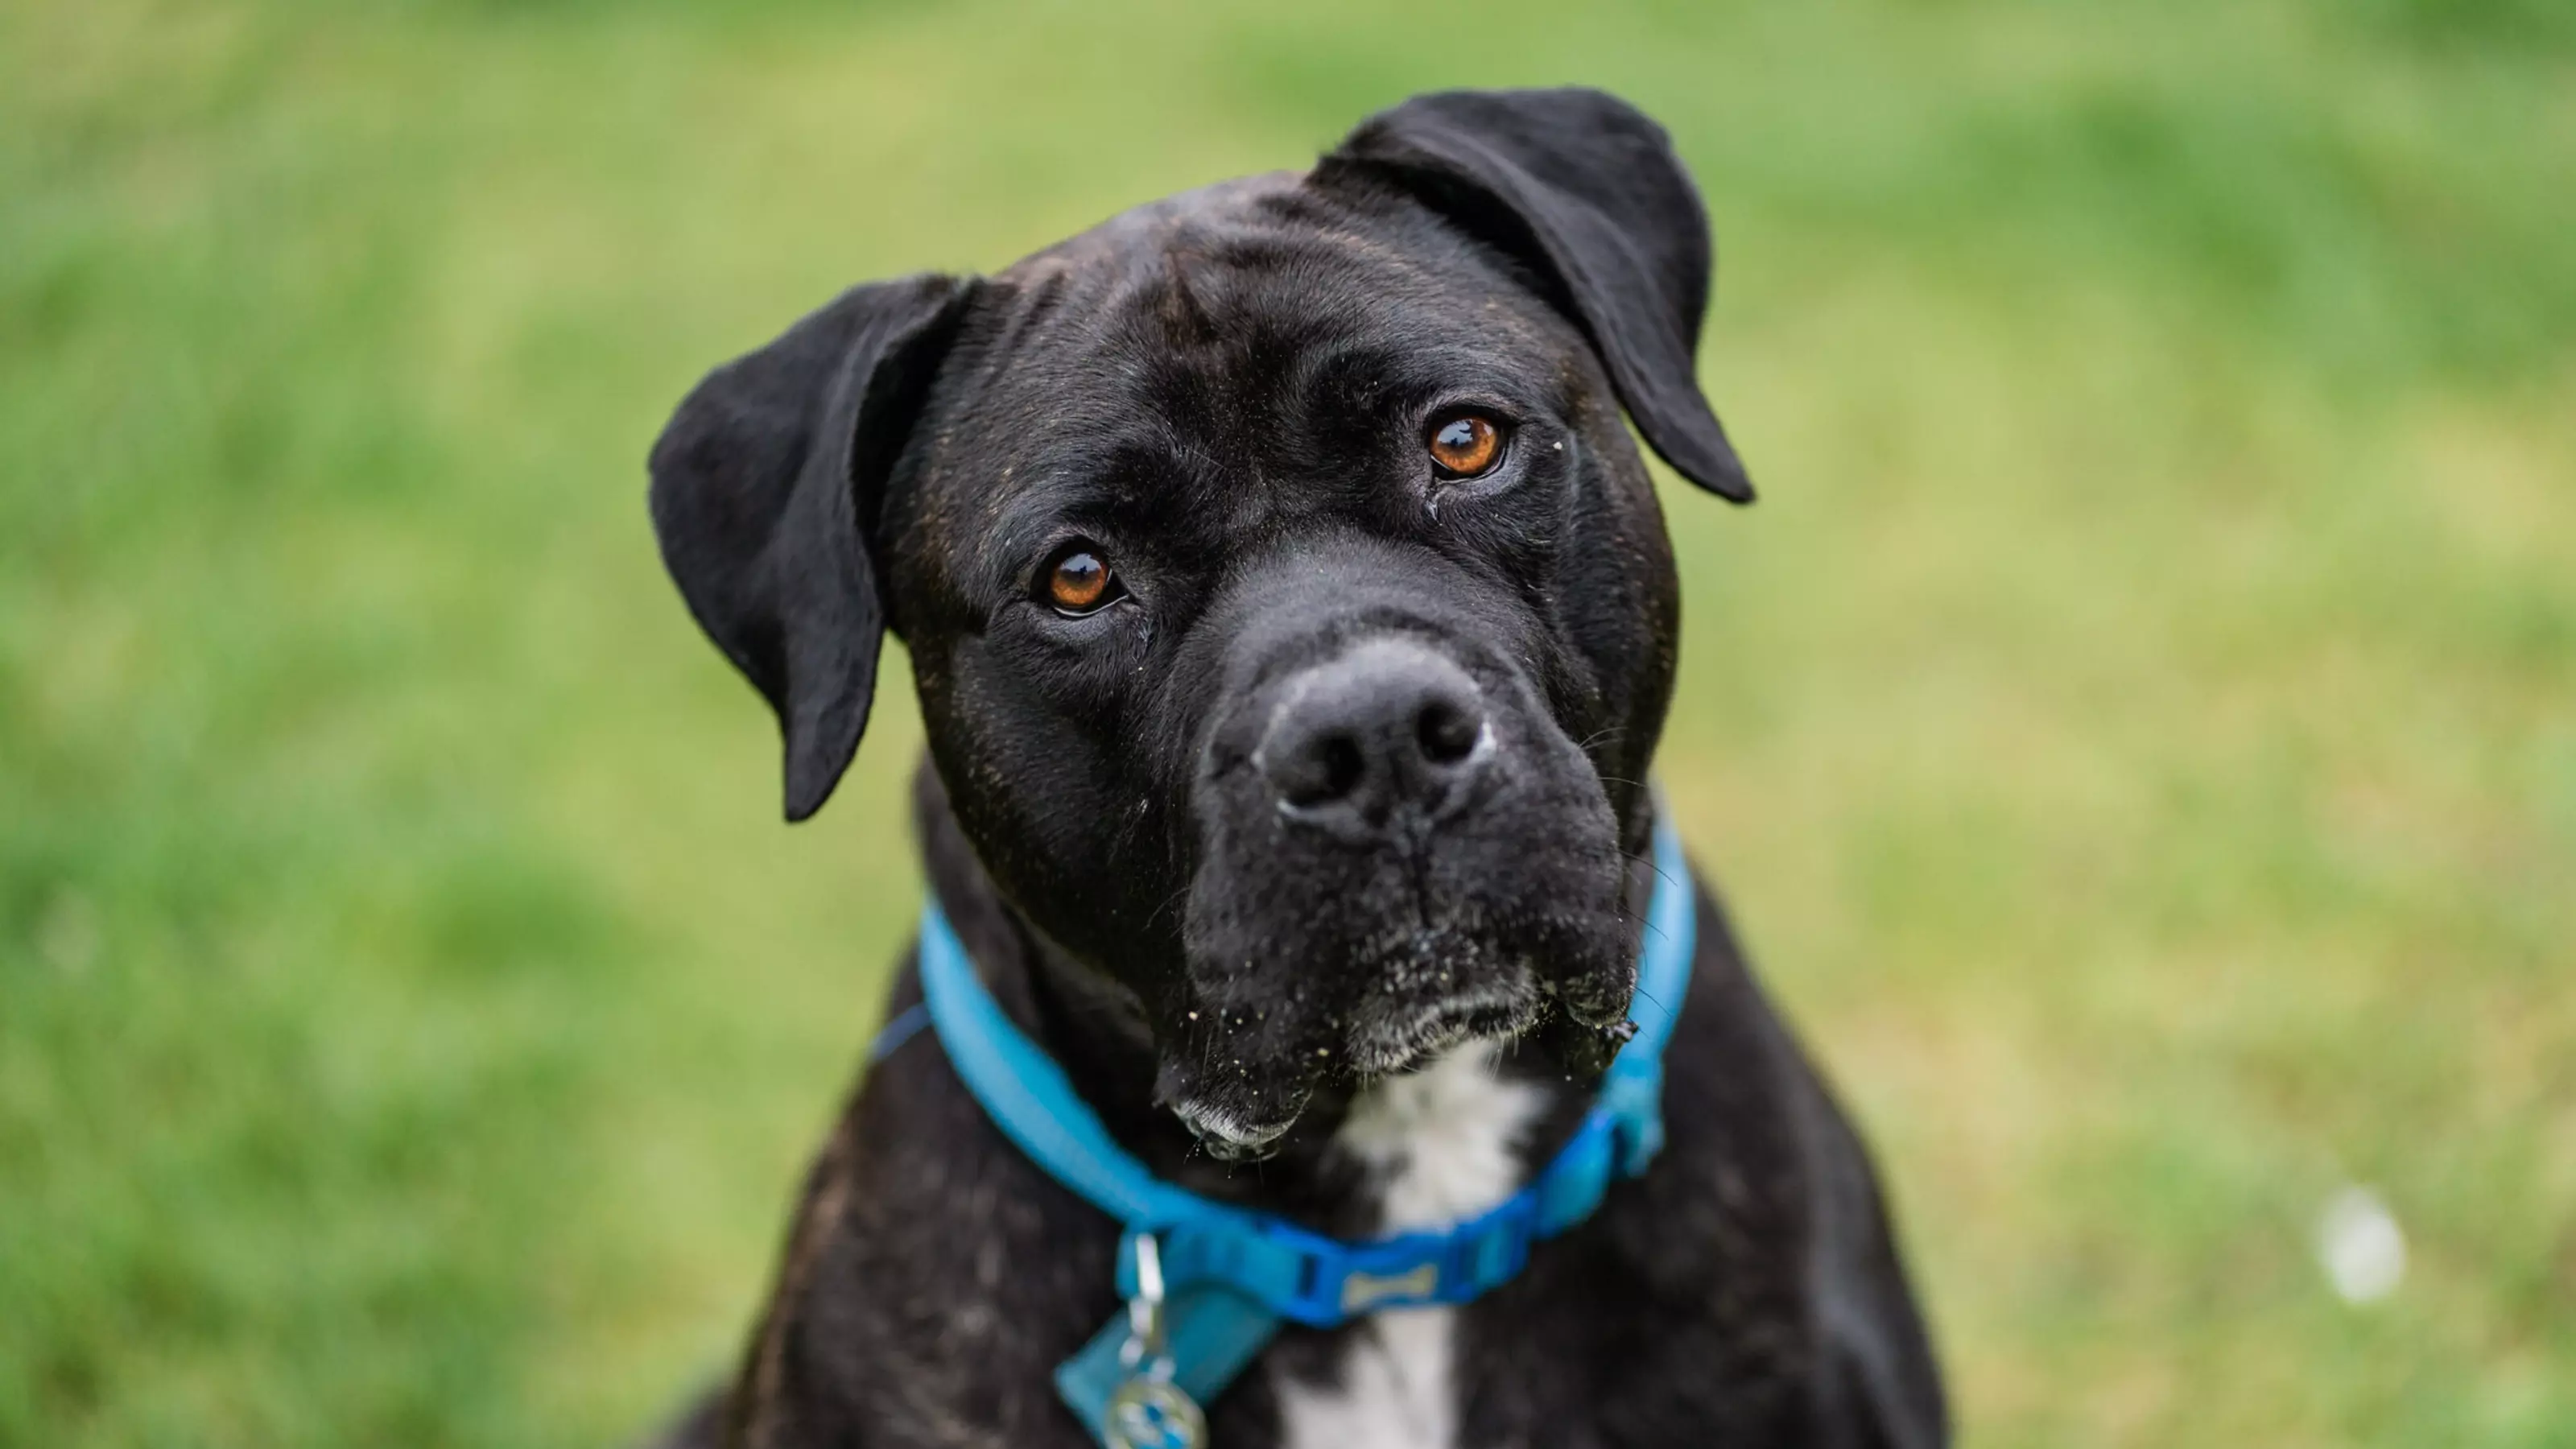 Black cane corso Rupert wearing a blue collar looking to camera while sitting on grass